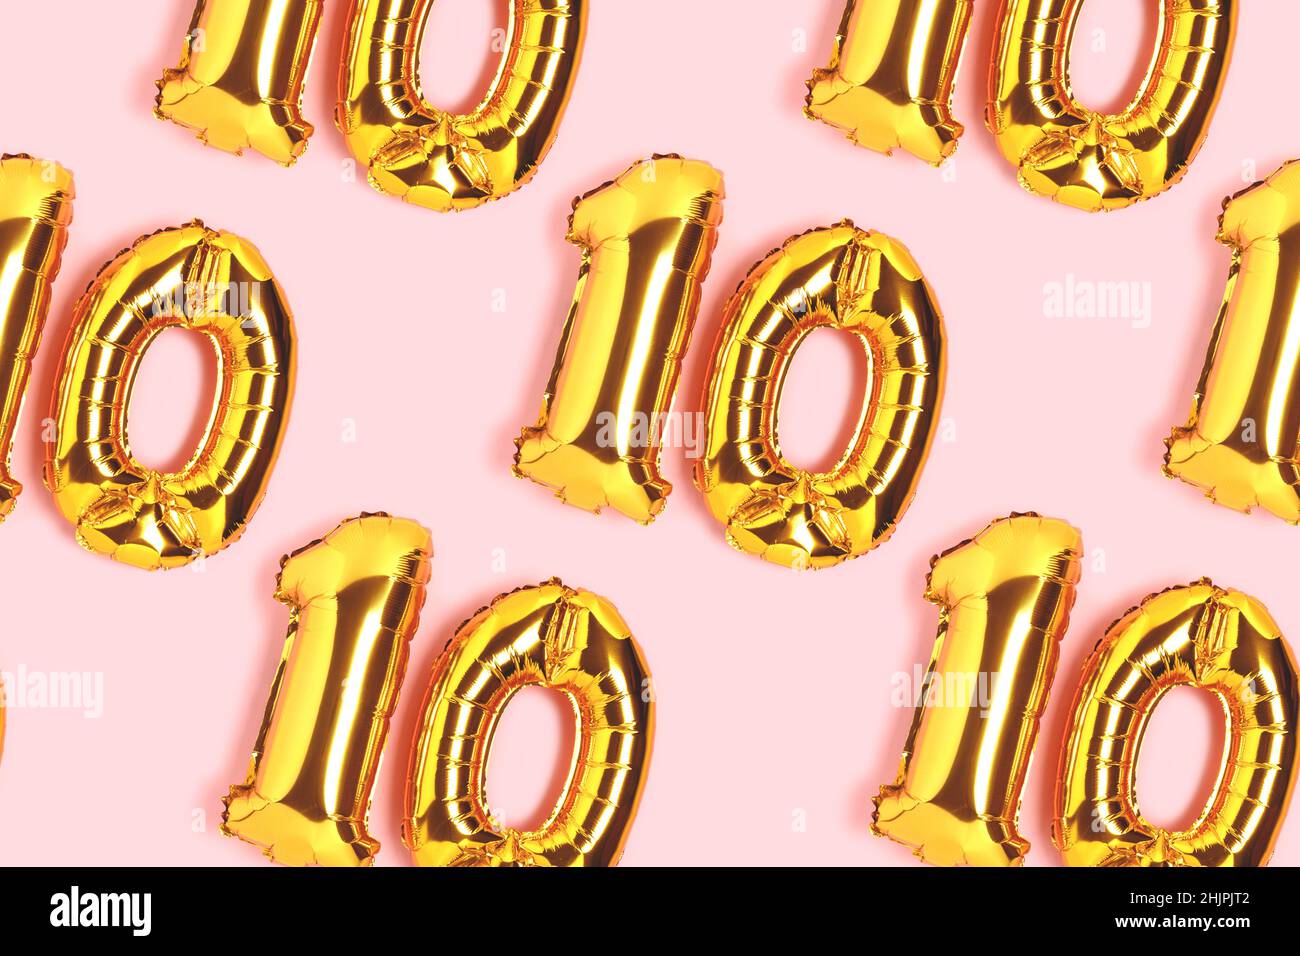 Number 10 golden balloons pattern. Ten years anniversary celebration concept on a pink background. Stock Photo